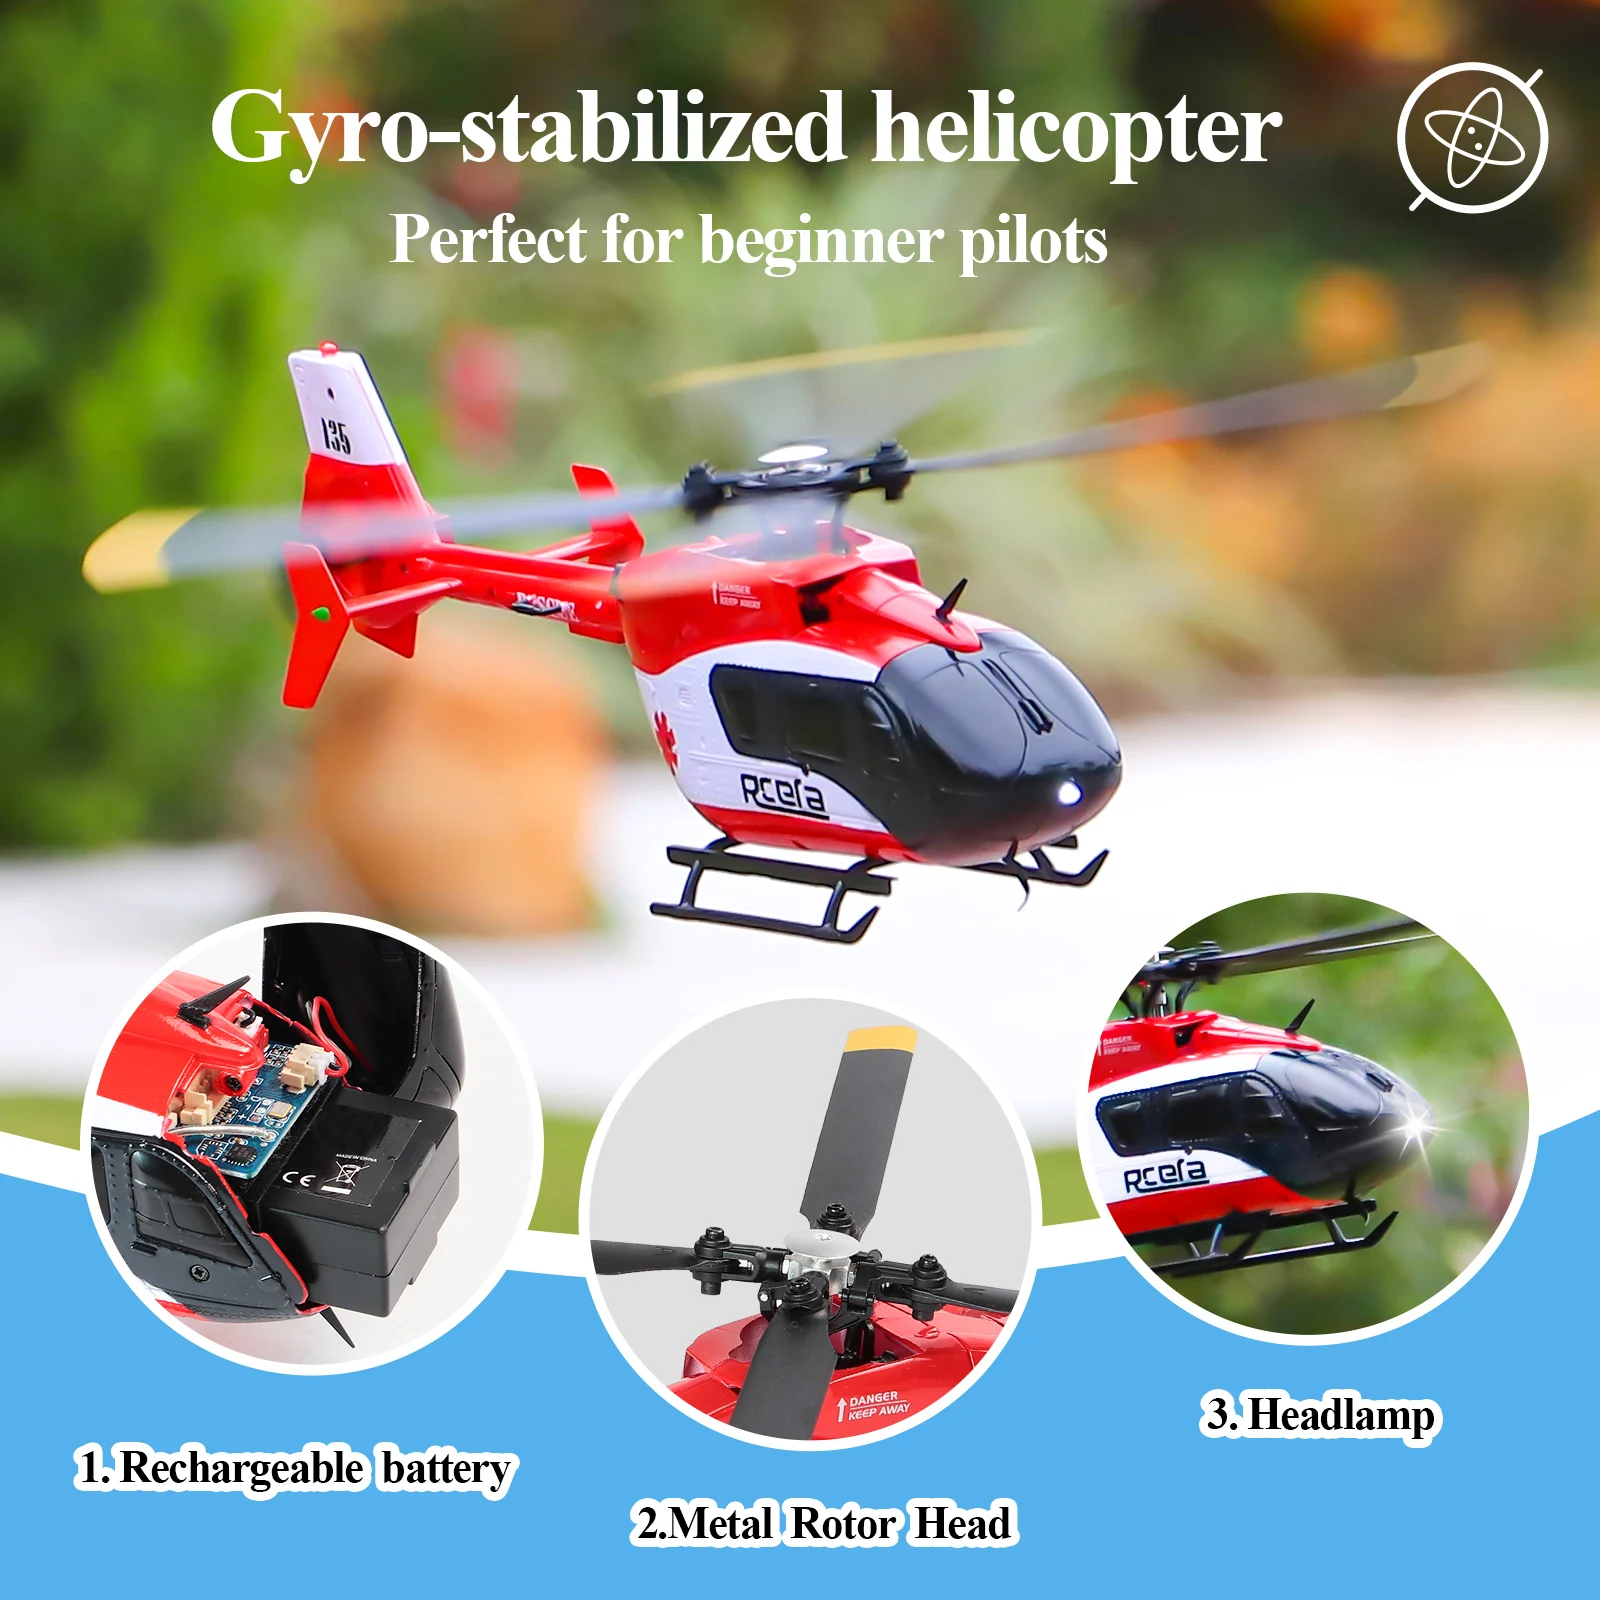 Era c159 ec135 2 4g 4ch rc helicopter for adults professional gyro stabilized one click thumb200